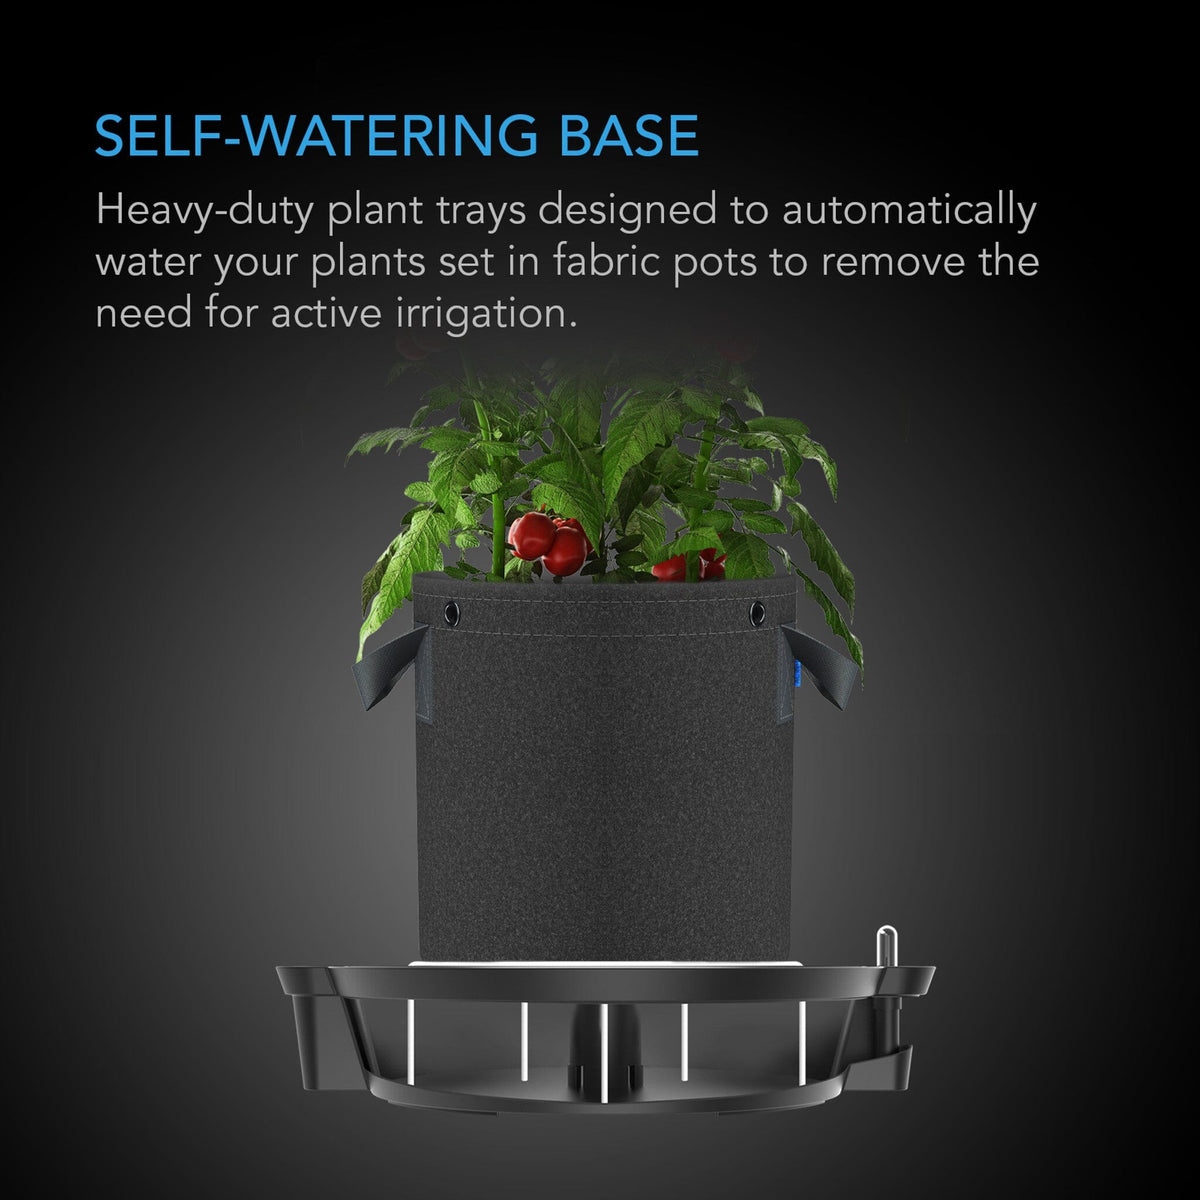 Self-watering base for fabric pots